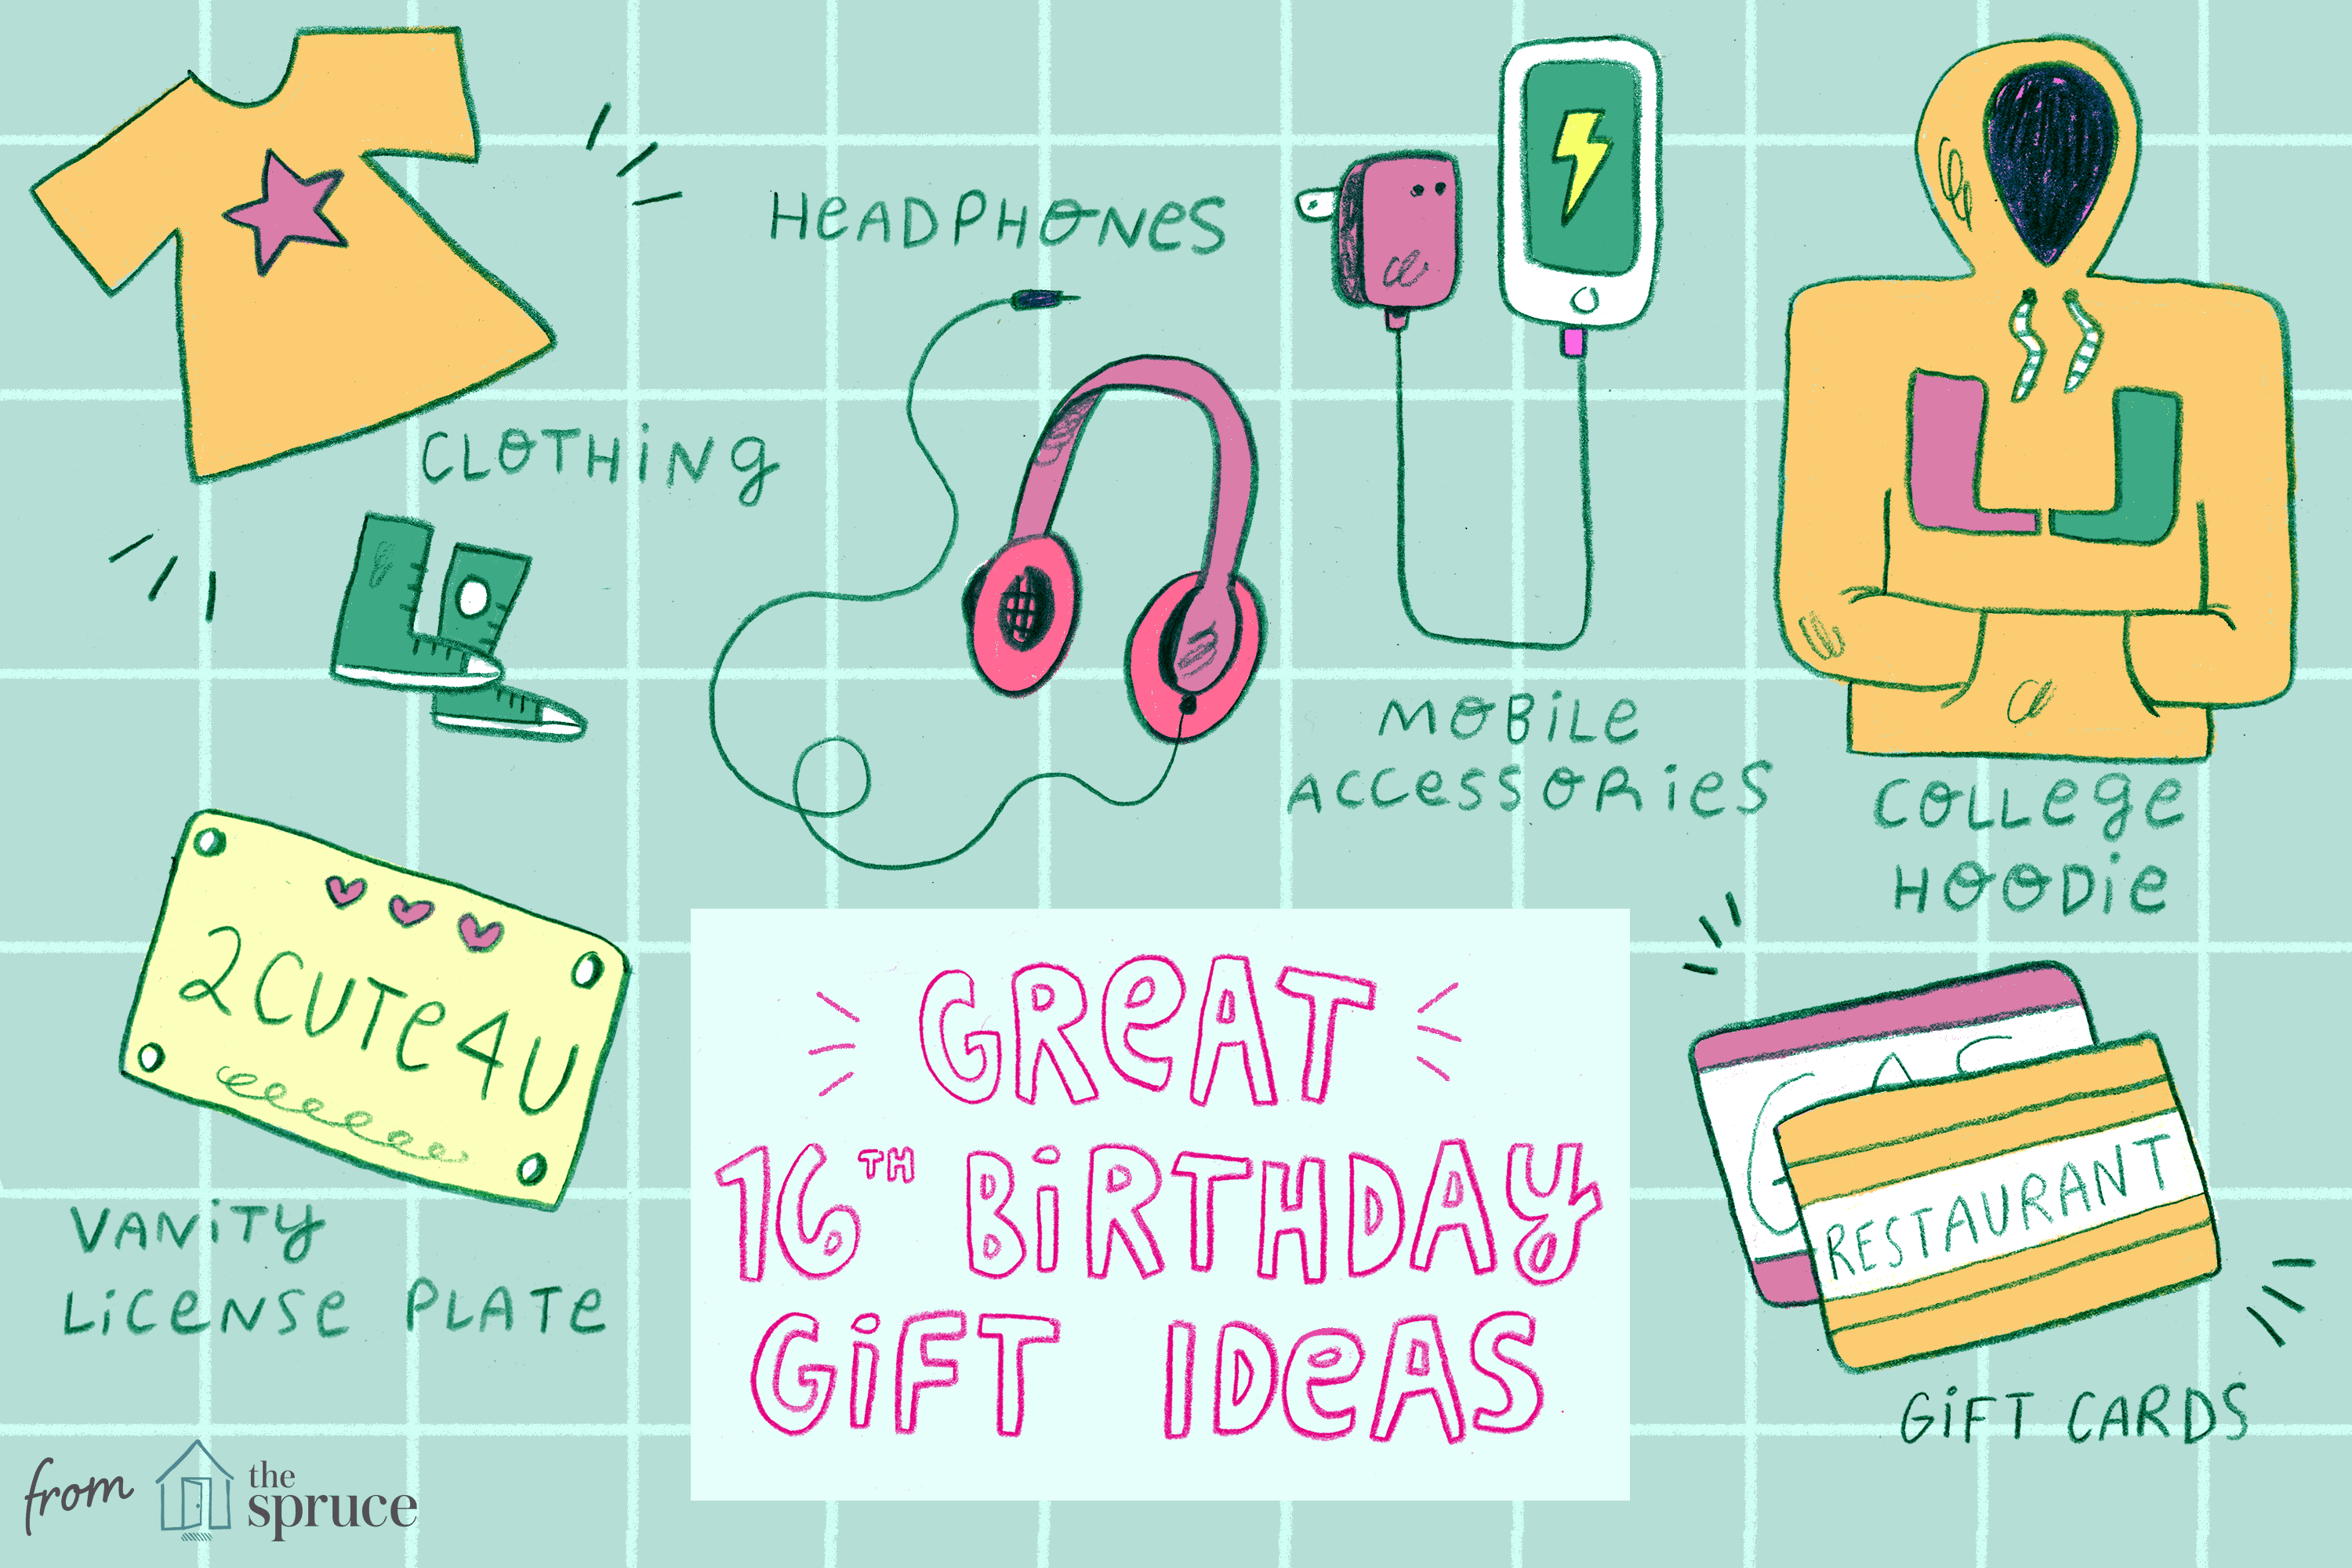 Sweet 16 Birthday Card Ideas 20 Awesome Ideas For 16th Birthday Gifts